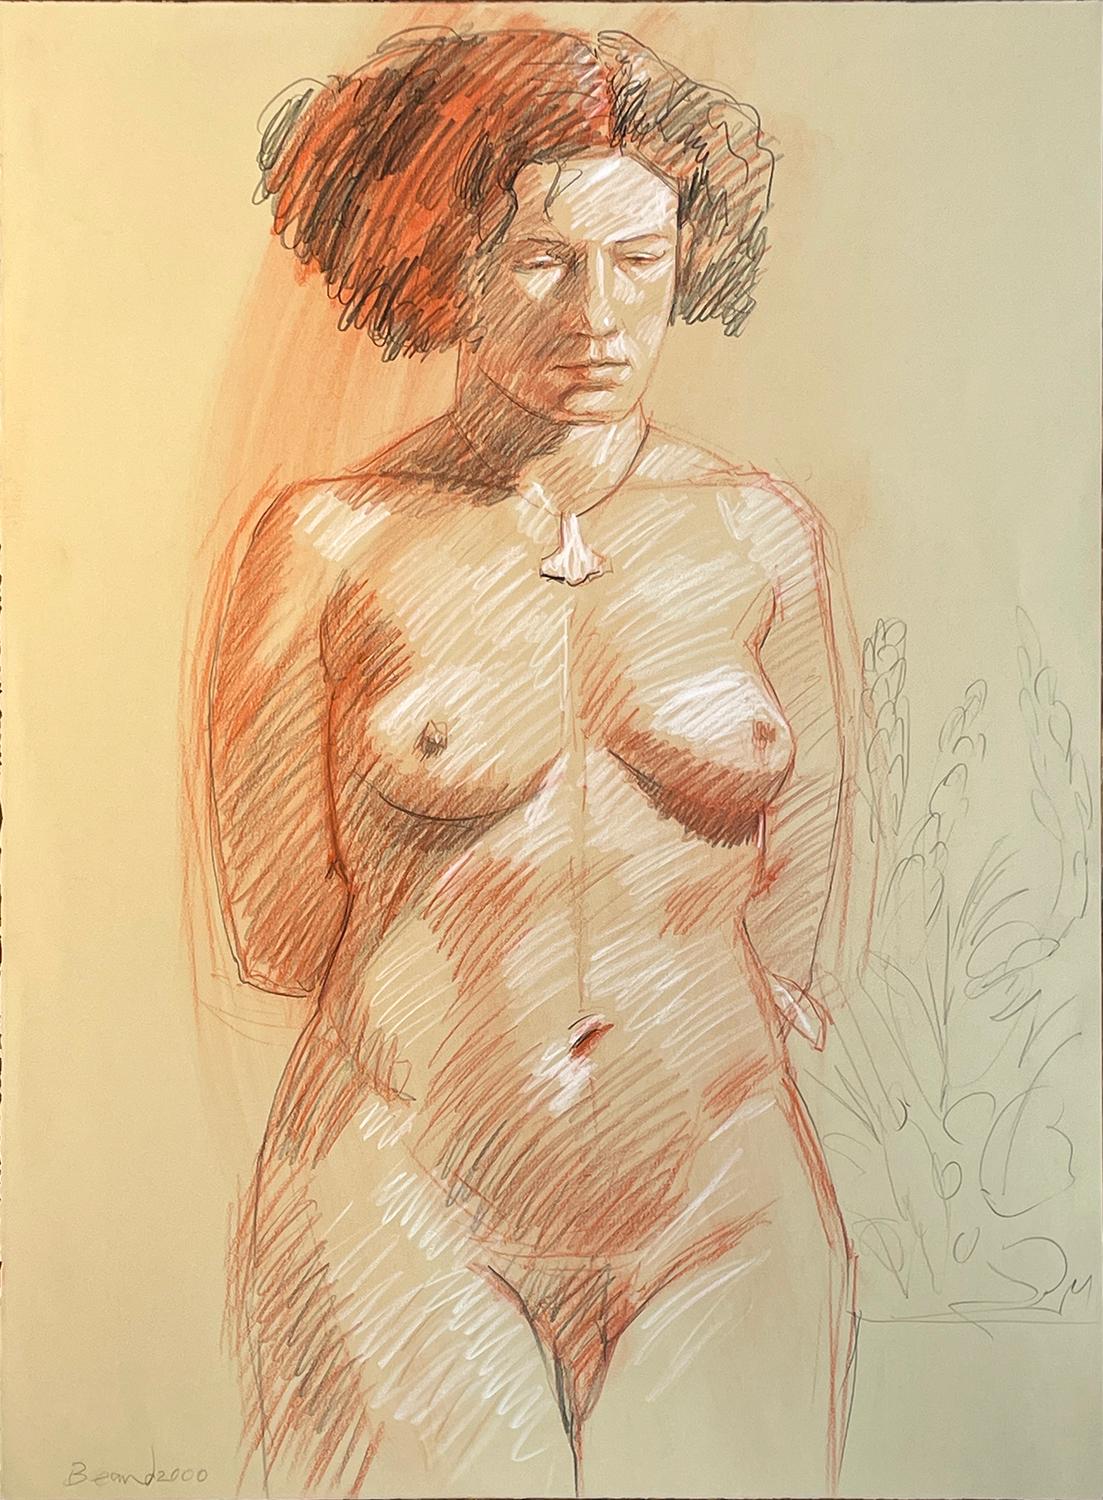 Academic style life drawing of female nude with charcoal and graphite by Mark Beard, "MB 017"
graphite, Conte crayon and charcoal on Arches paper
30 x 22 inches unframed
Signed, lower left

This is a relatively unusual piece from Beard, who is